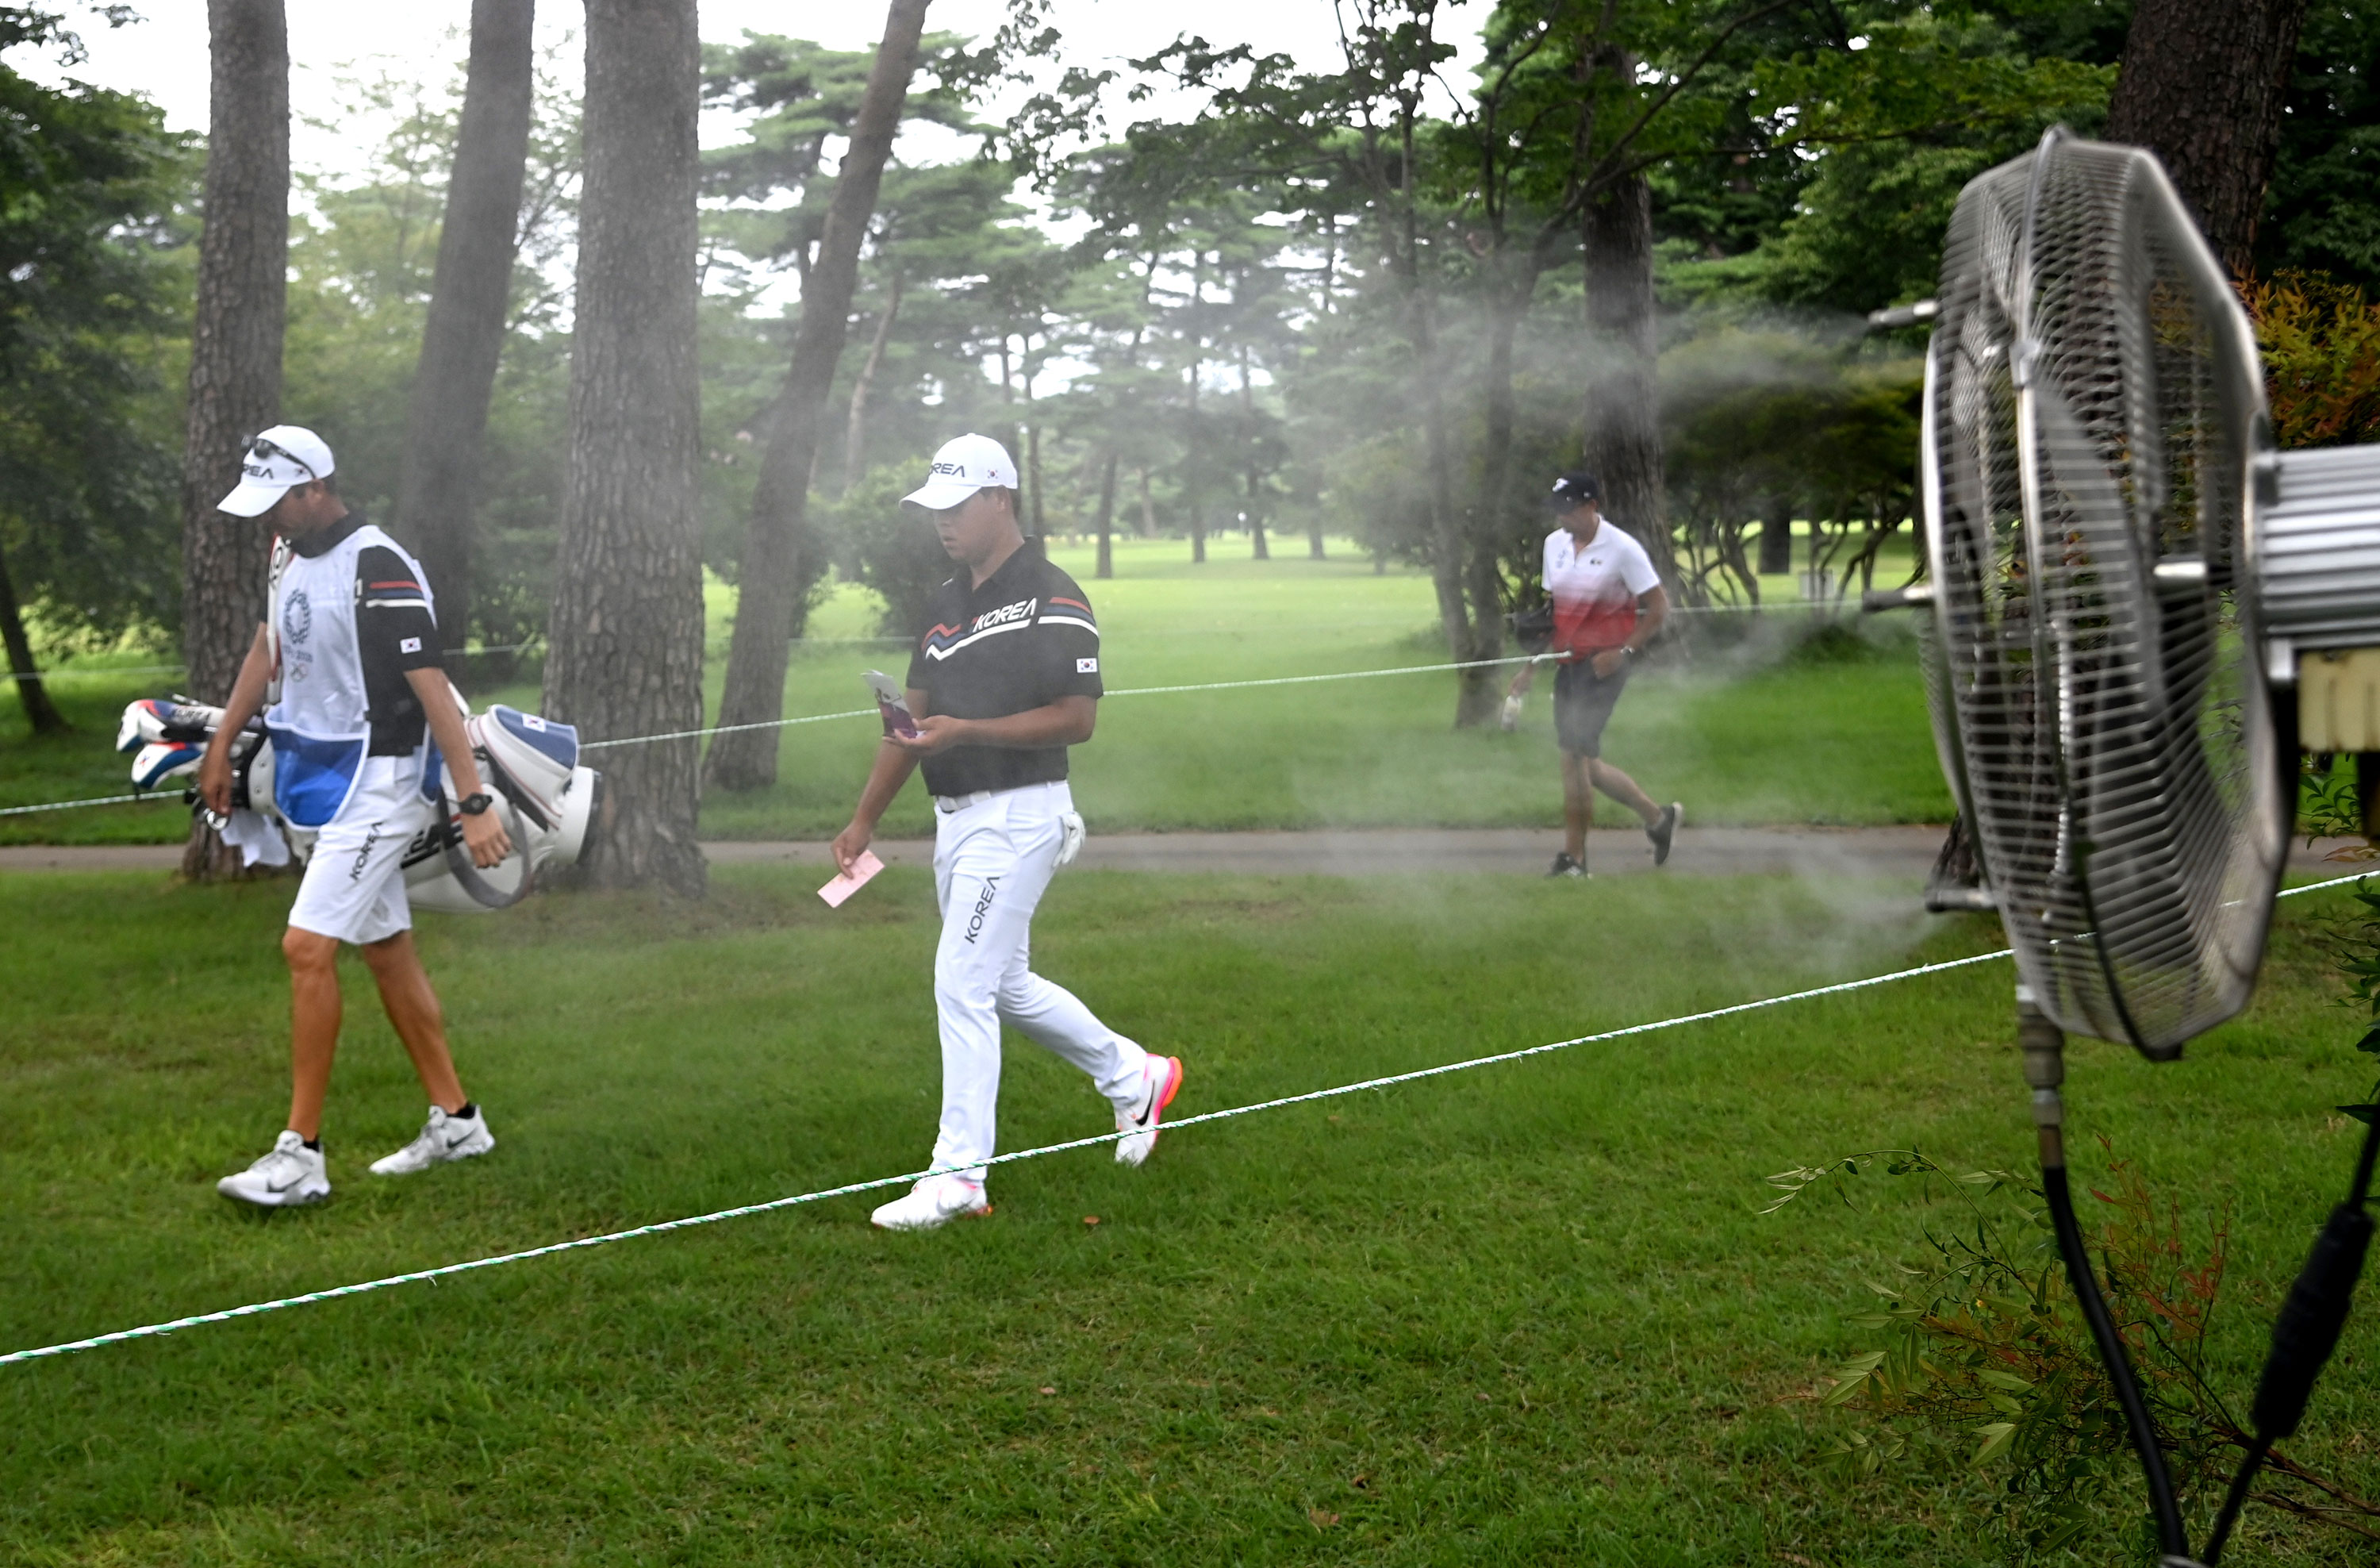 Kim Si Woo of South Korea walks past a fan spraying mist during golf competition in Kawagoe, Japan, on July 29.